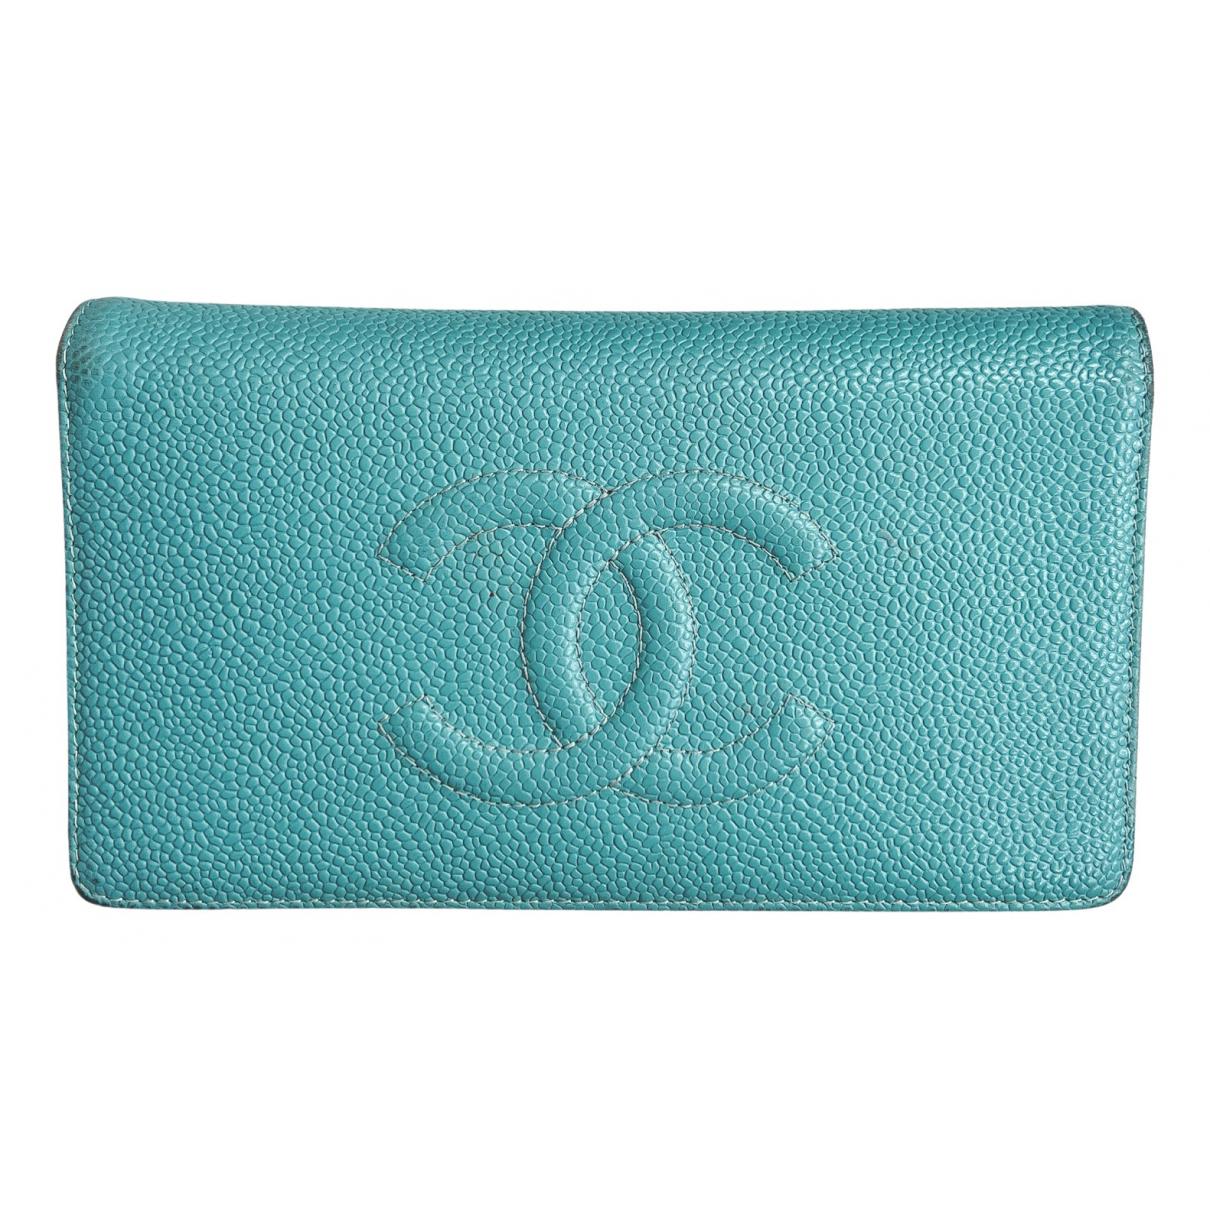 Timeless/classique leather wallet Chanel Black in Leather - 38731229